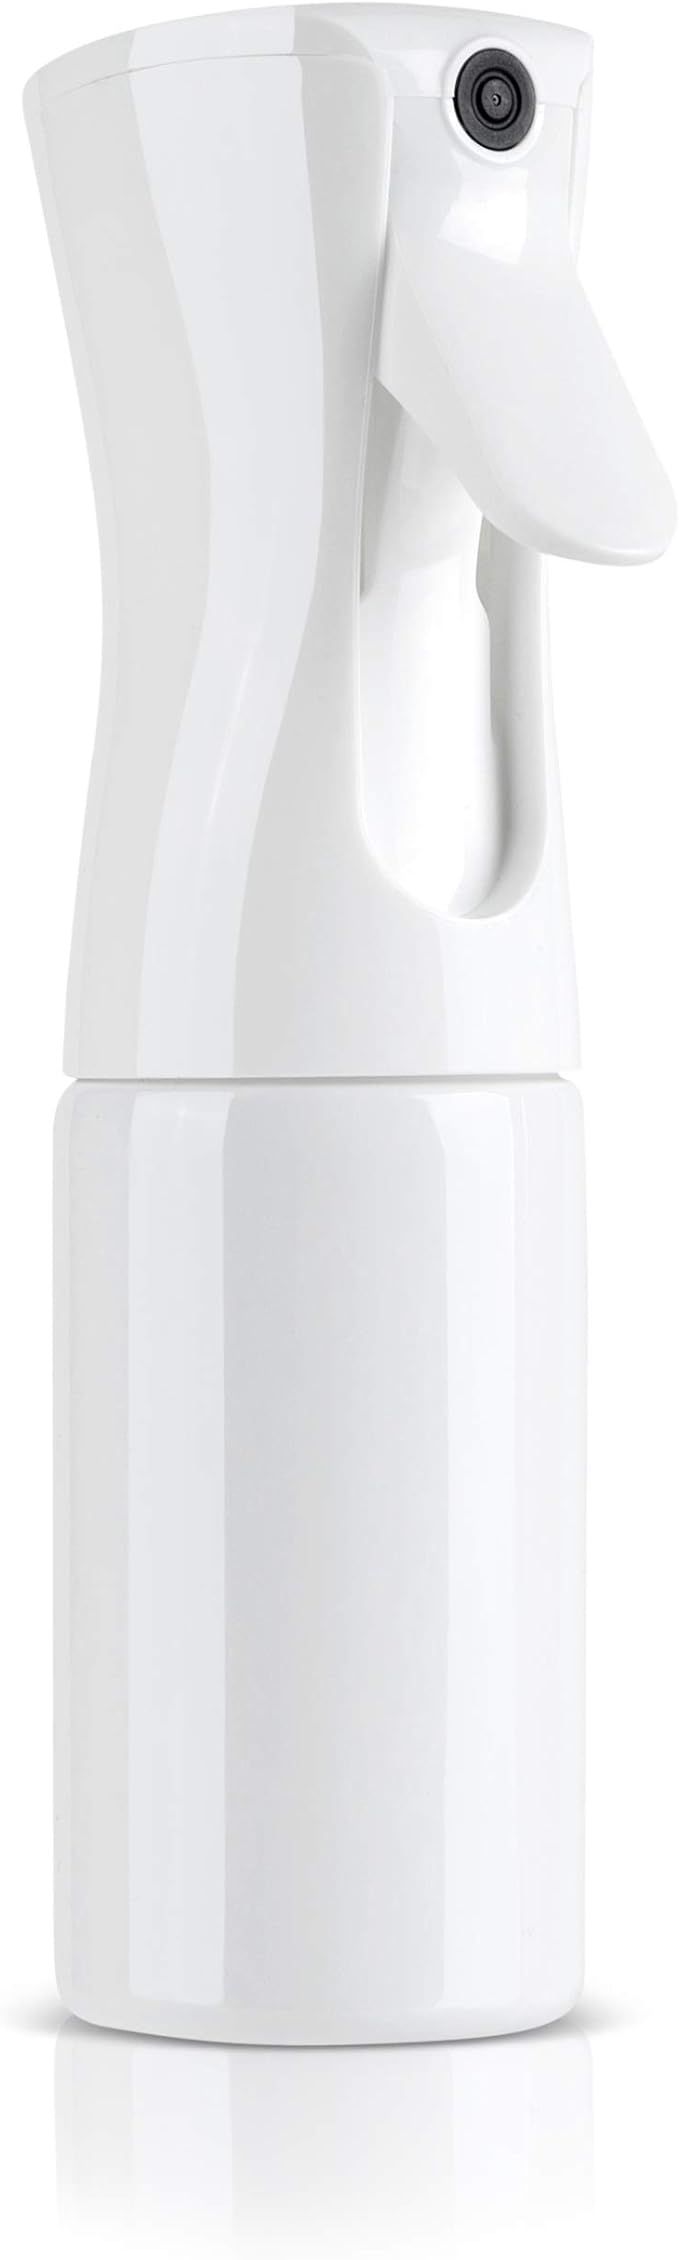 Hair Spray Misting Bottle - Ultra Fine Continuous Mist Sprayer For Hairstyling, Cleaning, Plants ... | Amazon (US)